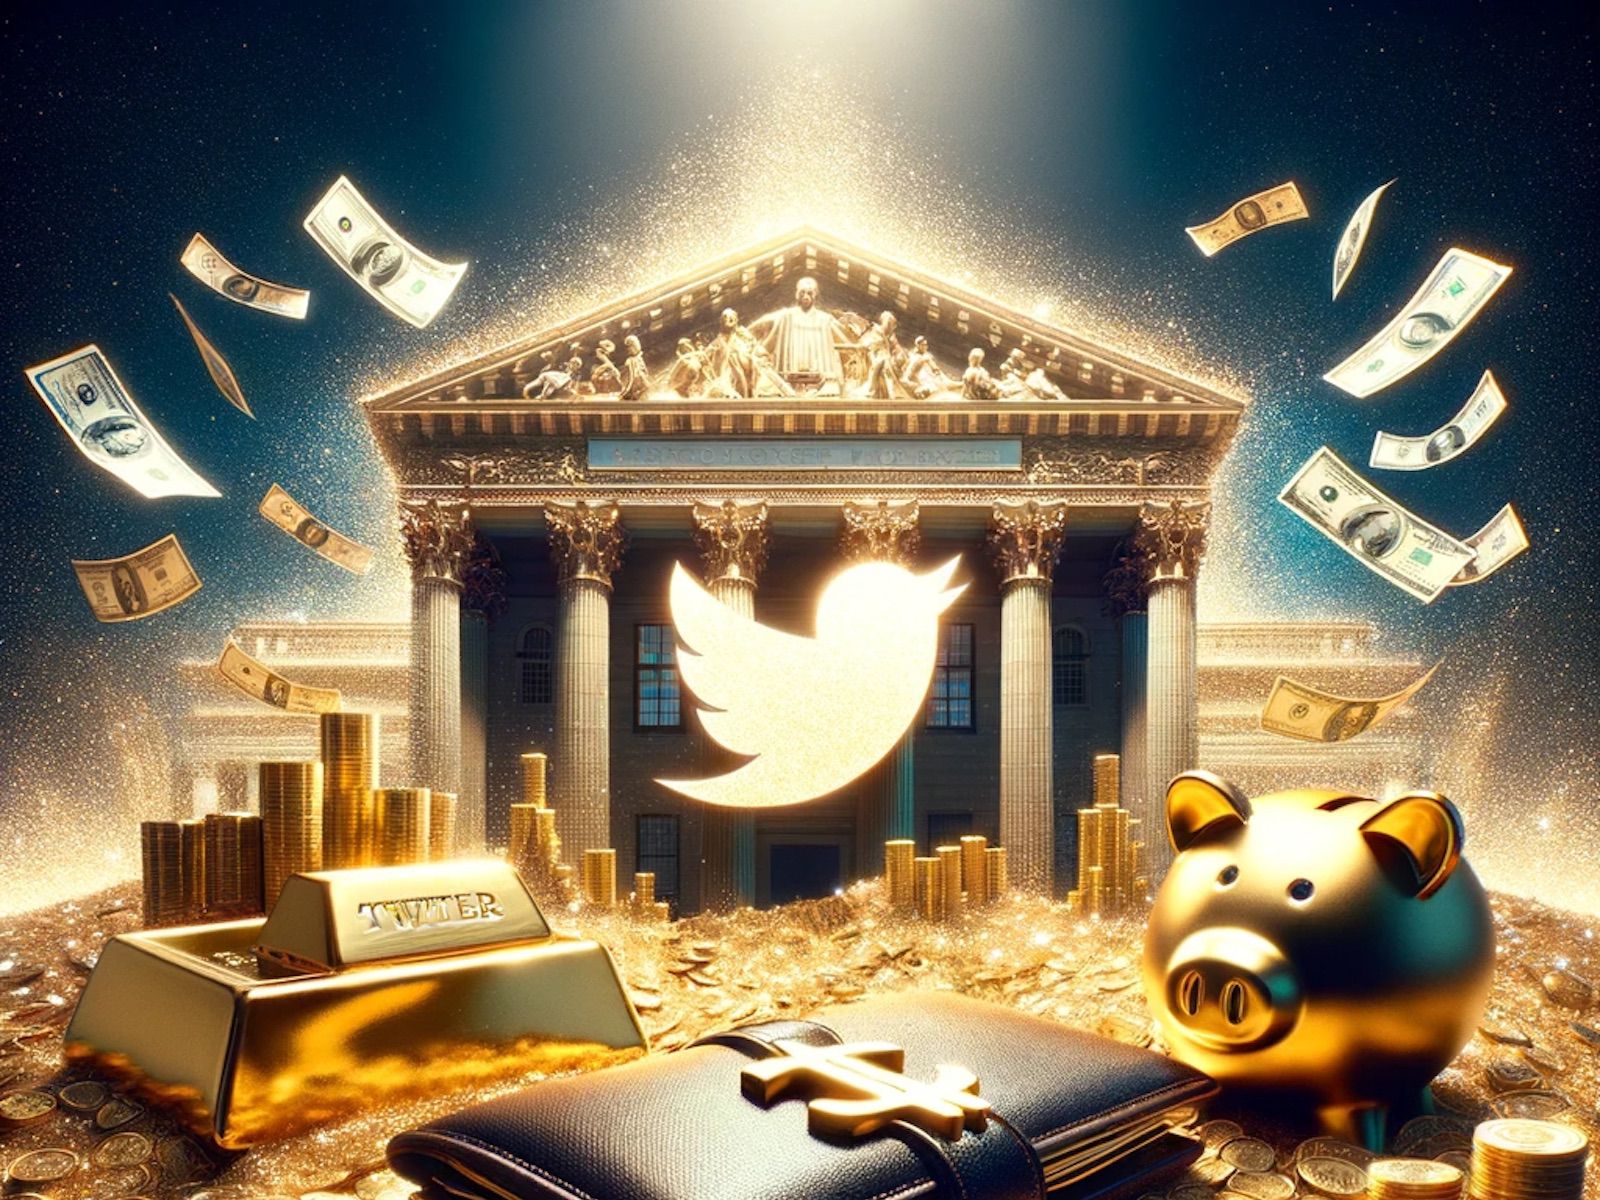 Twitter is trying to kill the bank